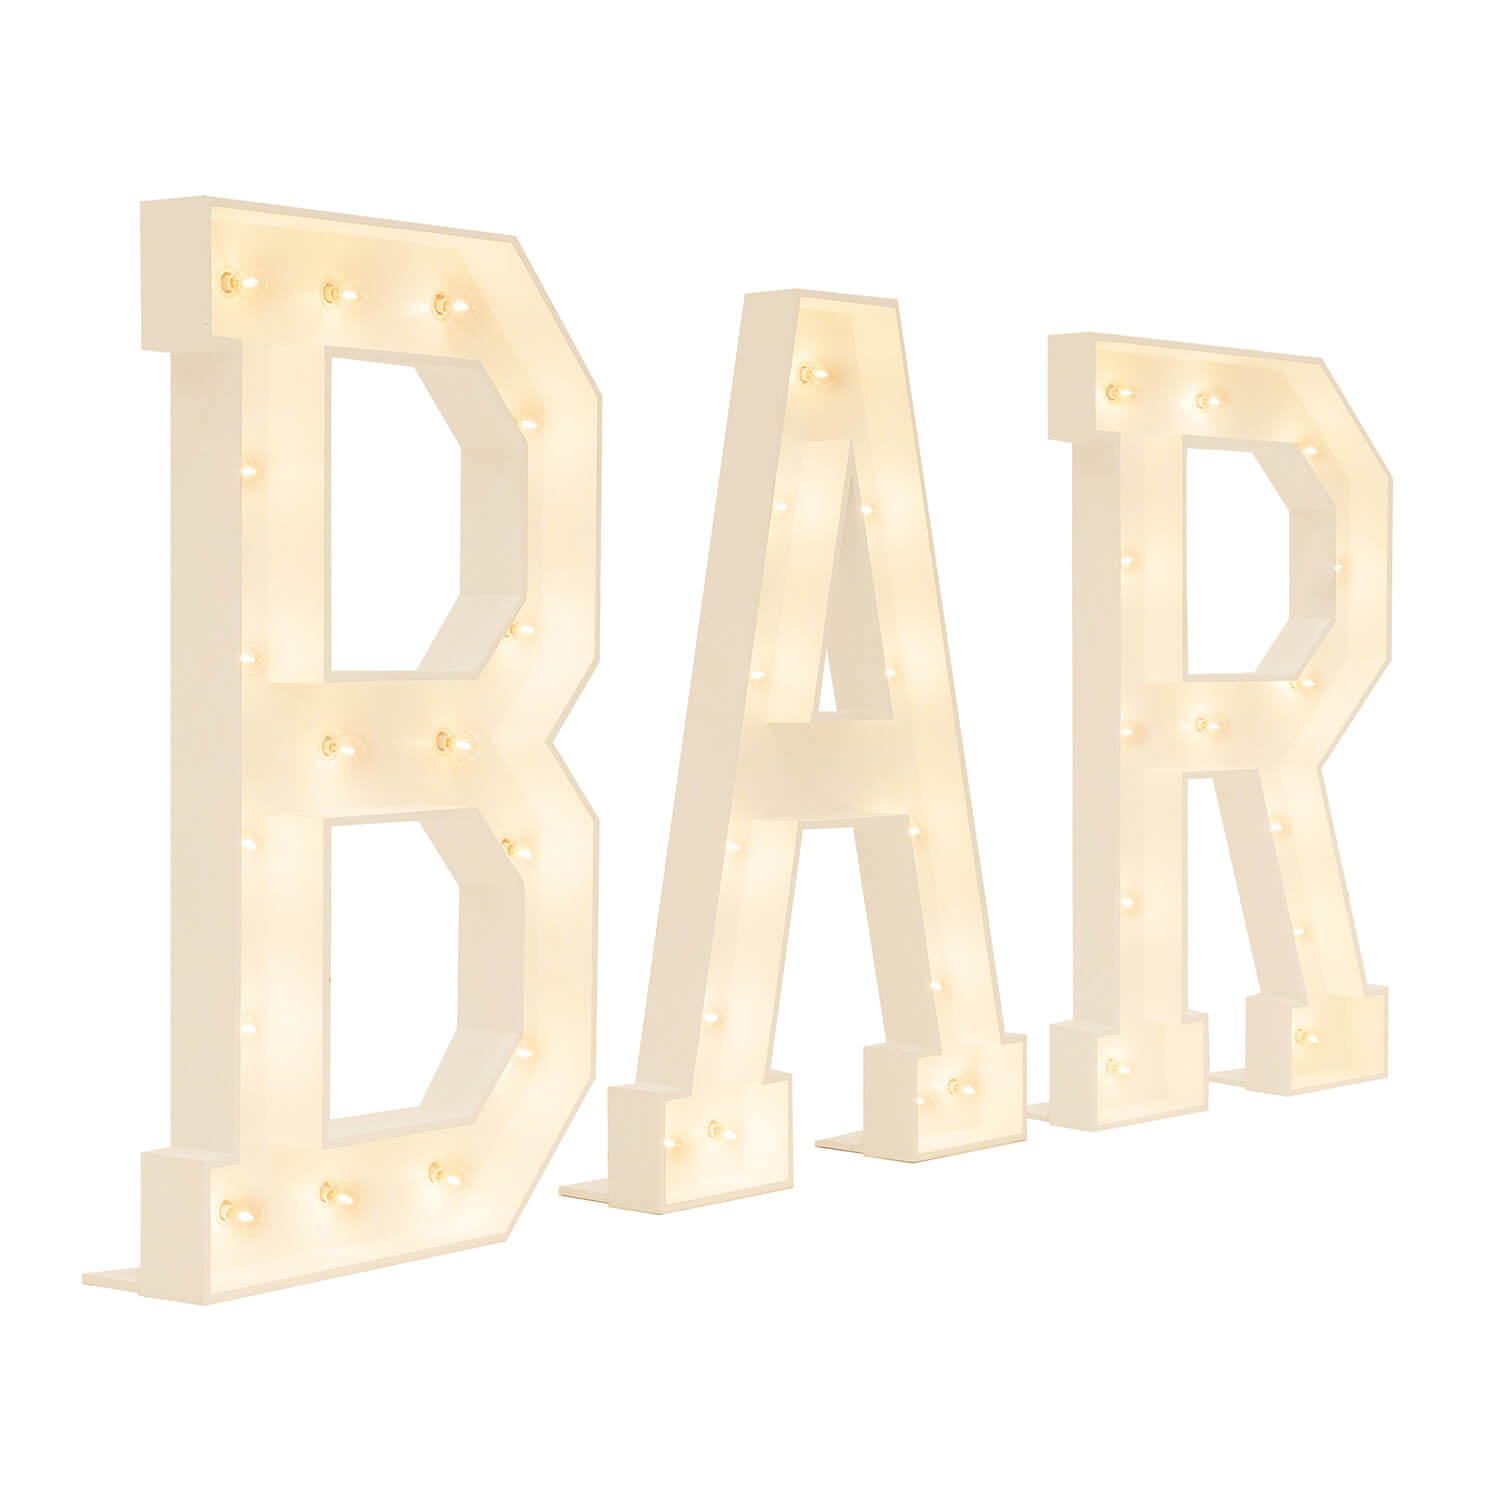 Event Decoration Wooden Large 3ft Tall LED Marquee Letter BAR Rose Morning